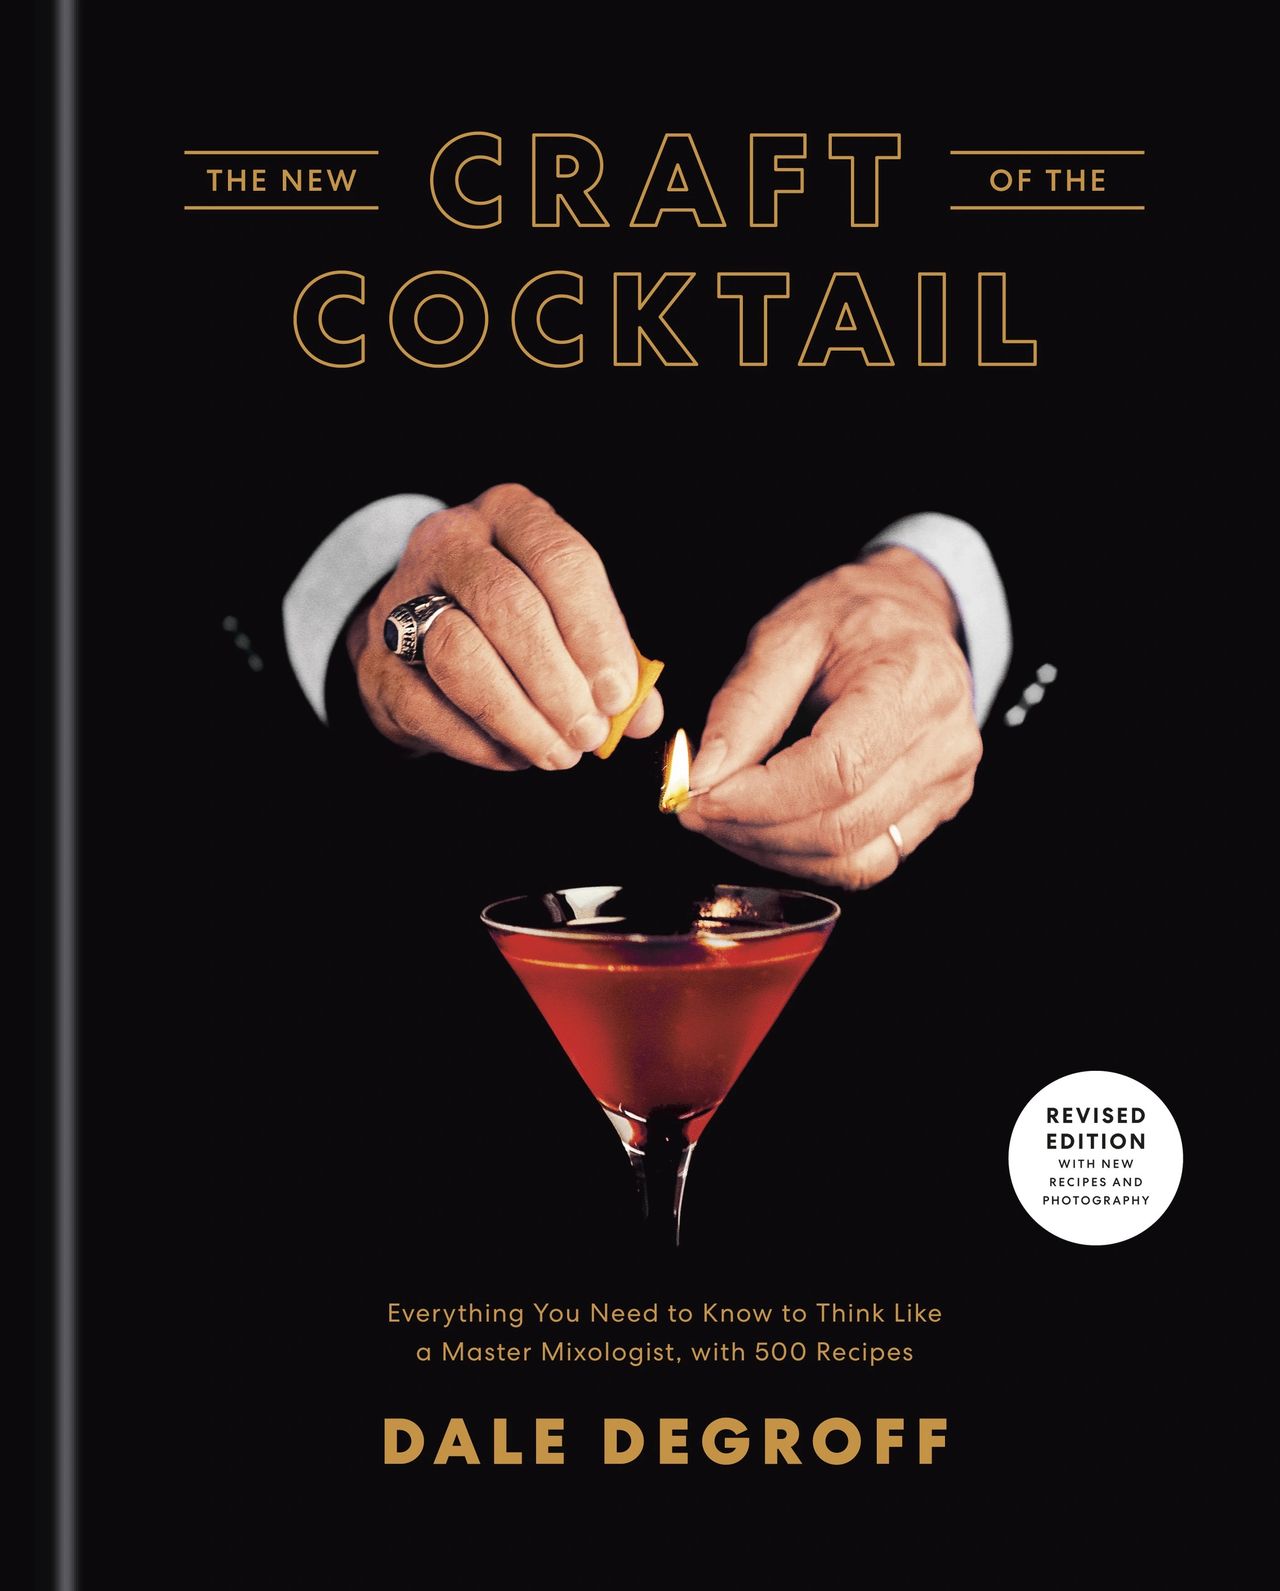 Book Review: “The New Craft of the Cocktail” by Dale DeGroff